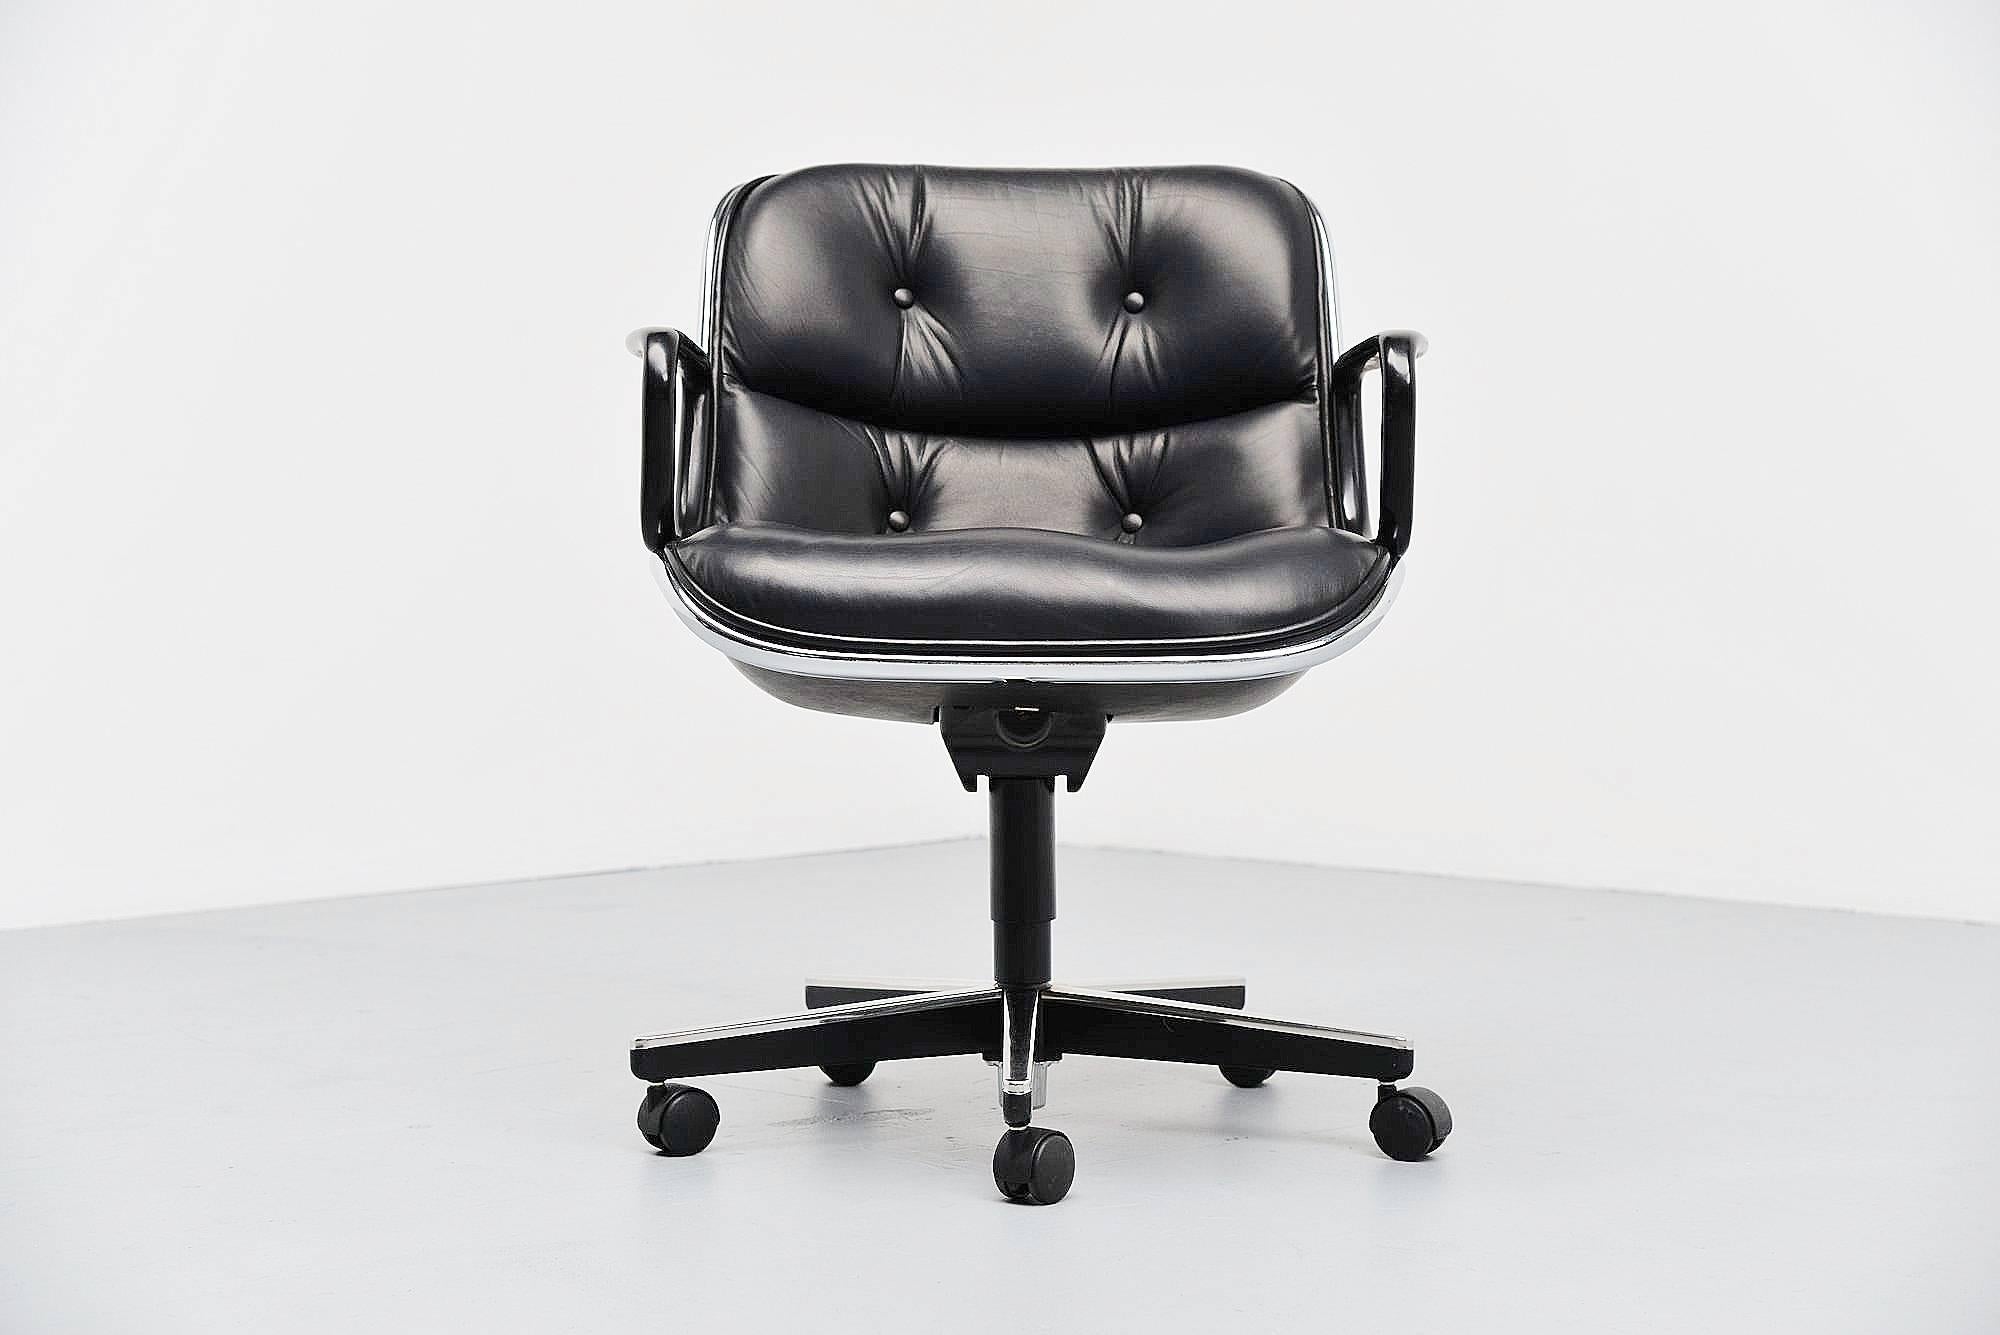 Comfortable executive desk chair designed by Charles Pollock and manufactured by Knoll International, United States, 1963. This desk chair is made of high quality black leather, has a chrome-plated rim and Bakelite arms. The chair swivels and tilts